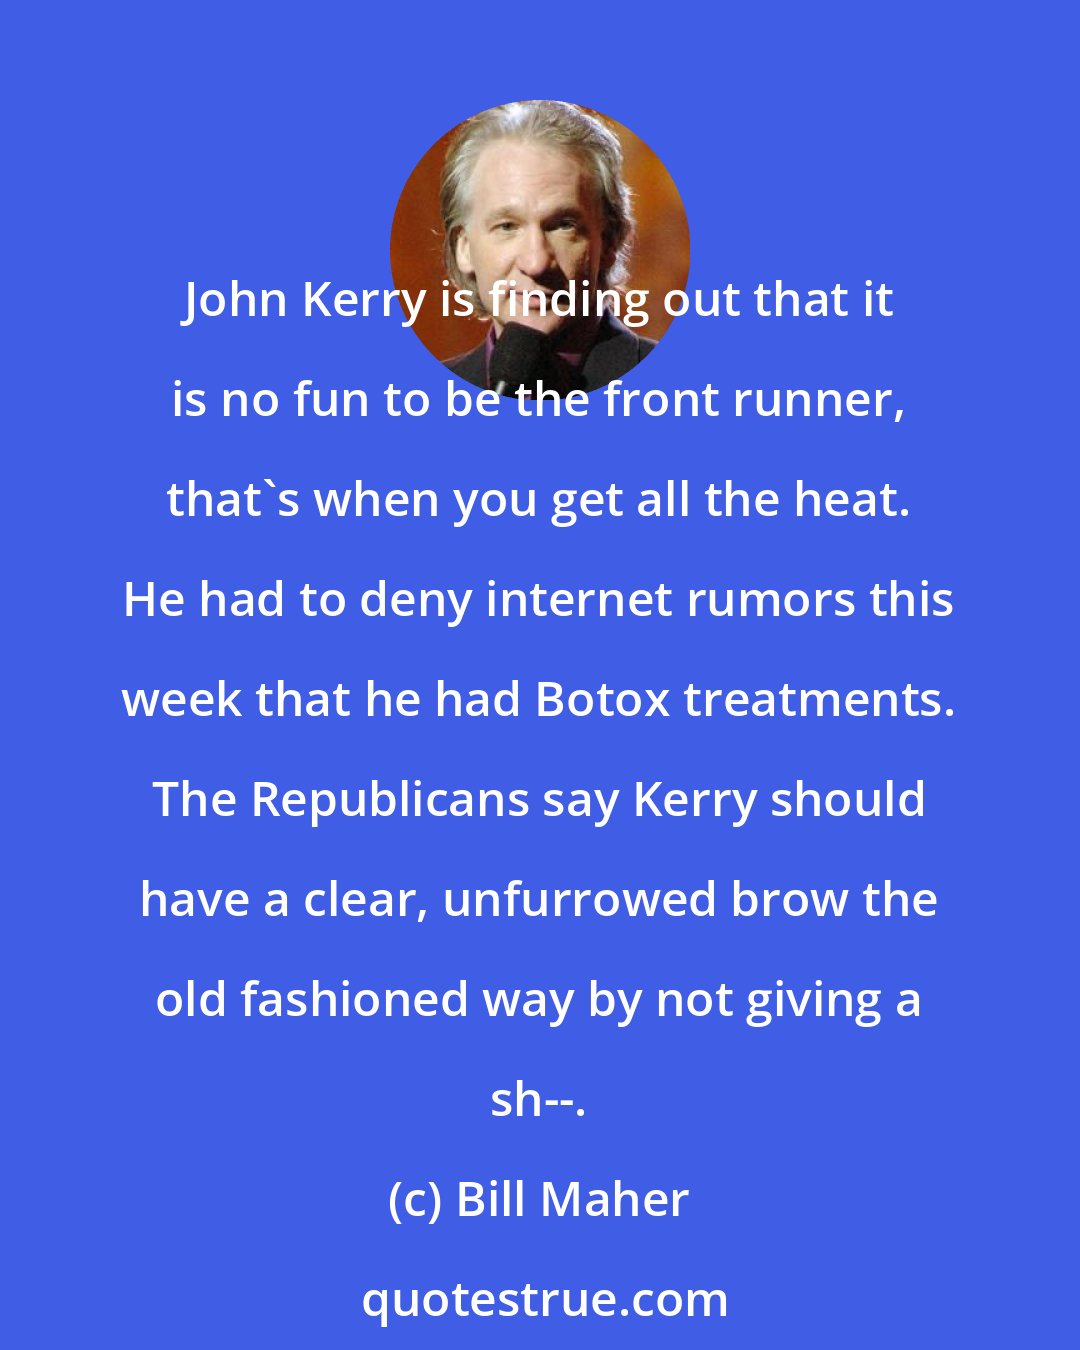 Bill Maher: John Kerry is finding out that it is no fun to be the front runner, that's when you get all the heat. He had to deny internet rumors this week that he had Botox treatments. The Republicans say Kerry should have a clear, unfurrowed brow the old fashioned way by not giving a sh--.